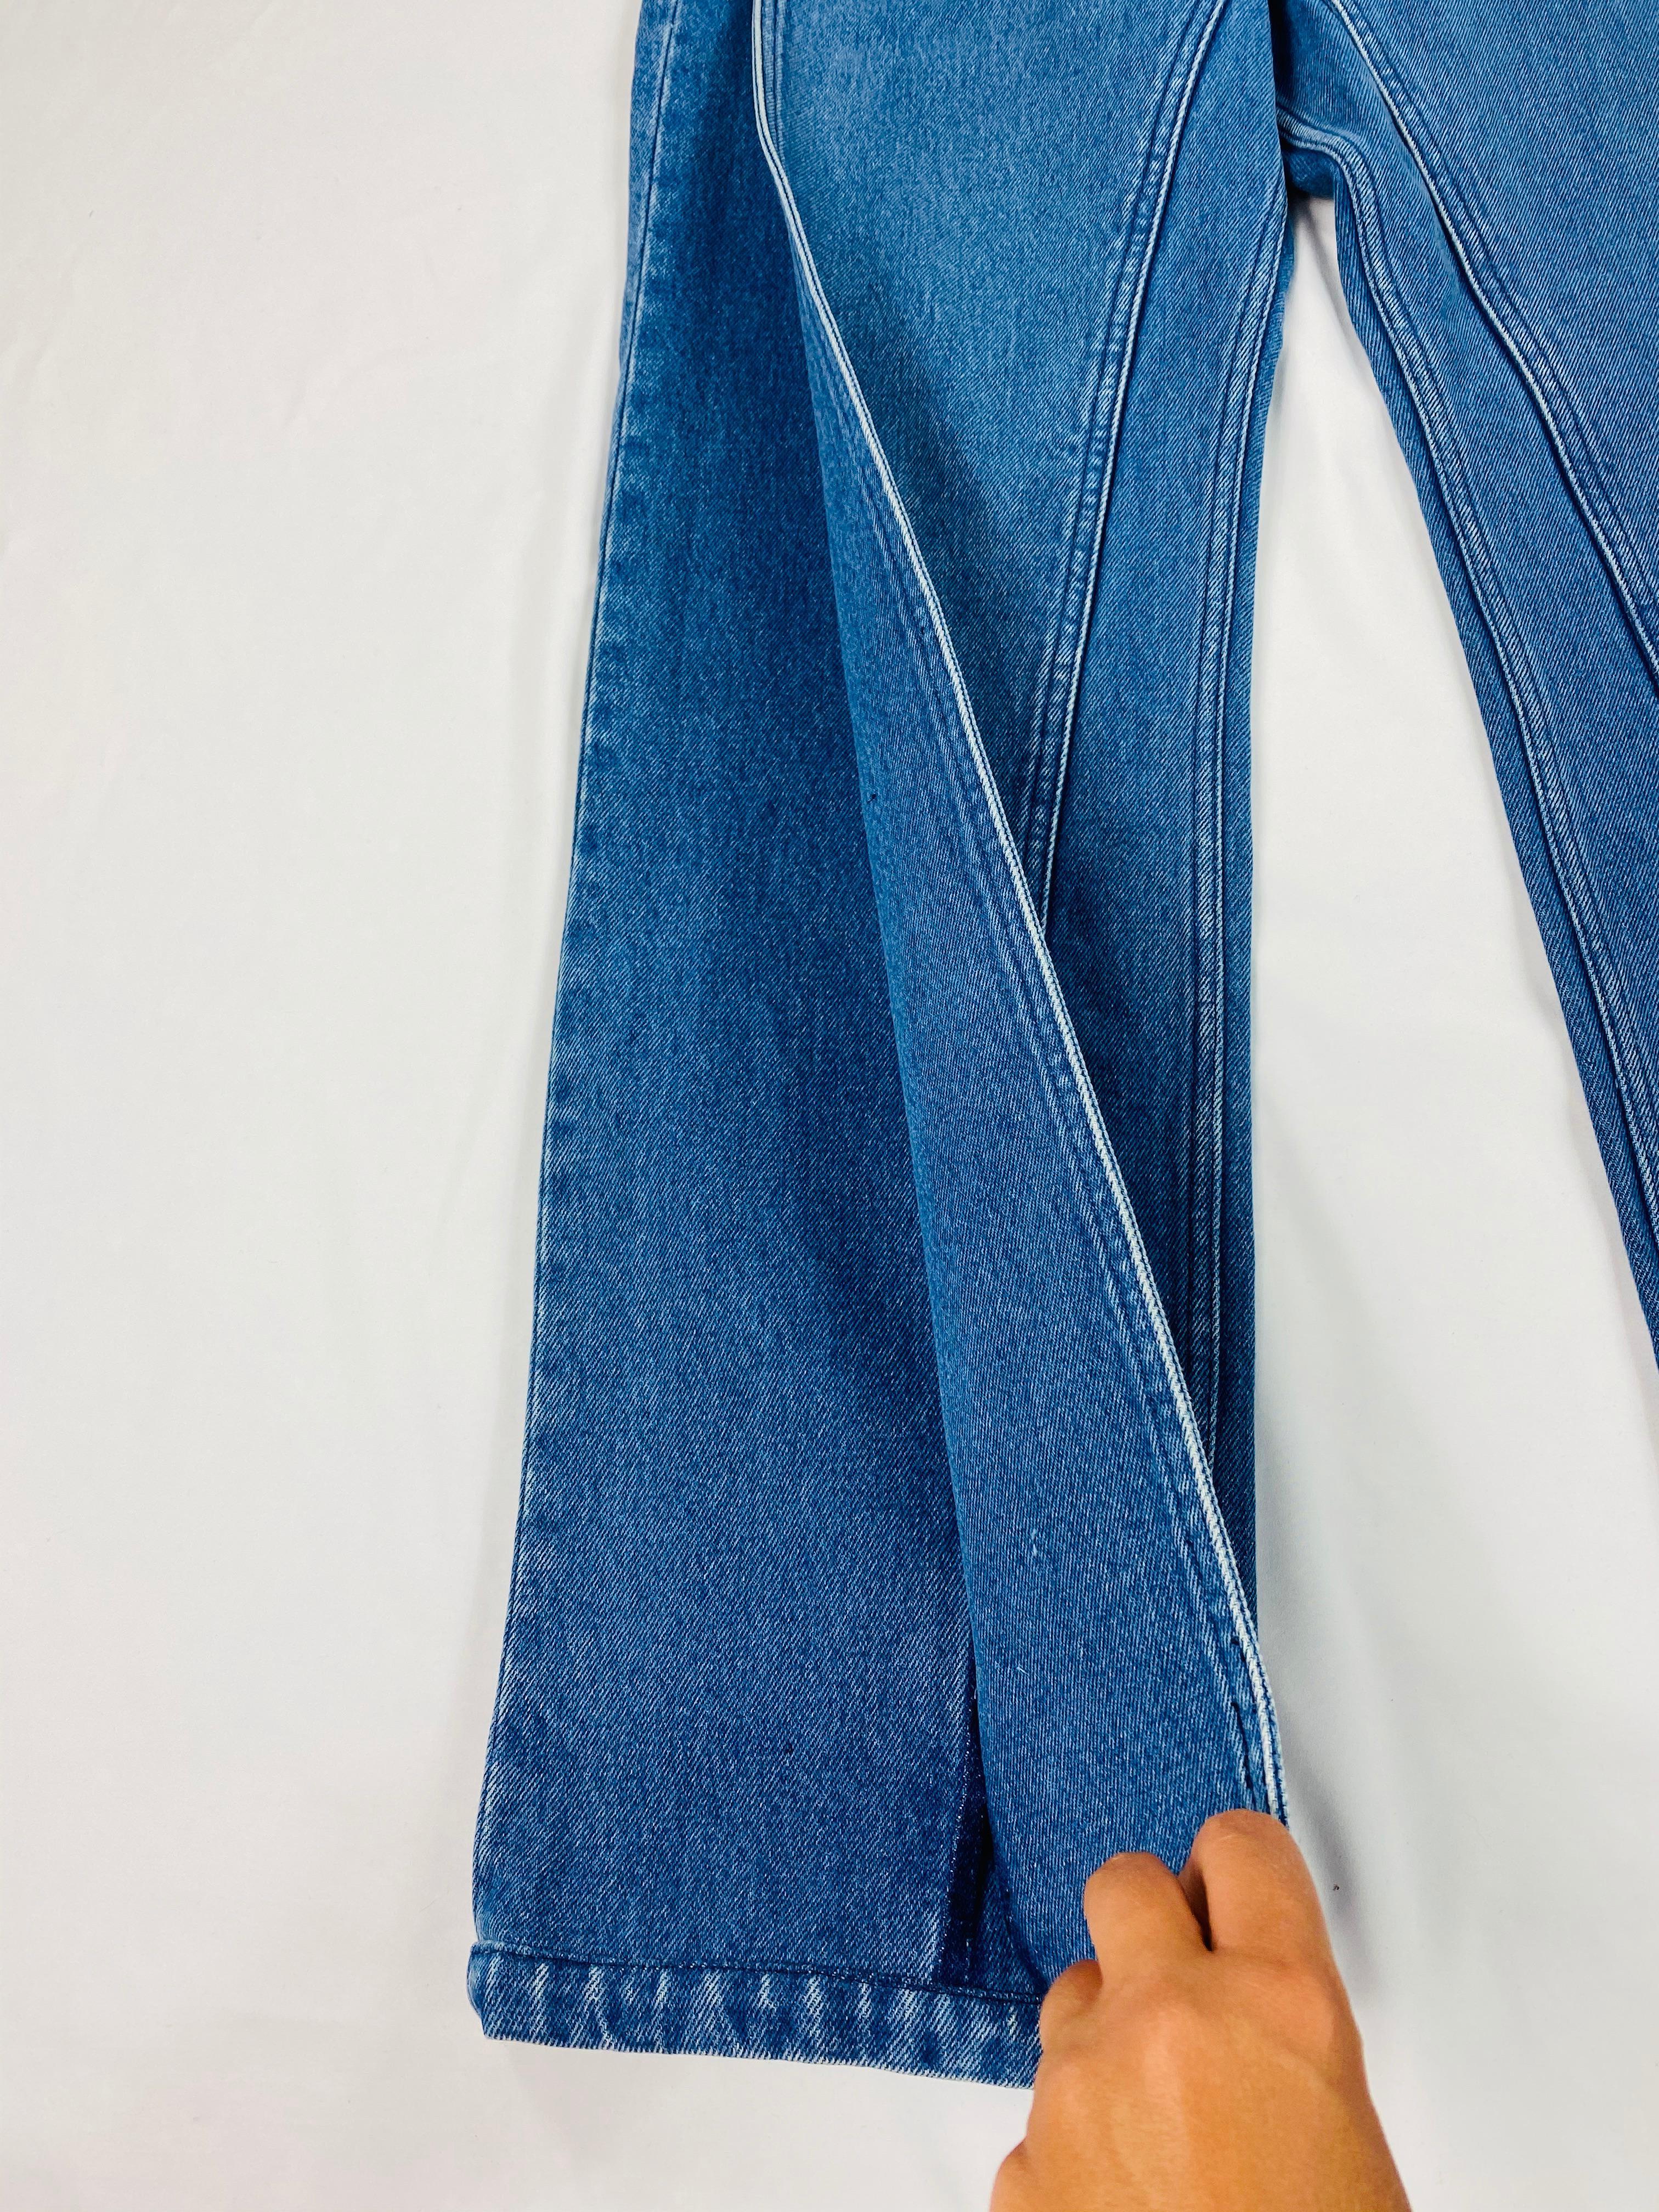 product details:

Featuring blue stonewash denim pants with straight fit and full length. Double layered front leg extending the pocket down to the hemline. Extended rear pocket stitching down rear leg. 
Made in France.